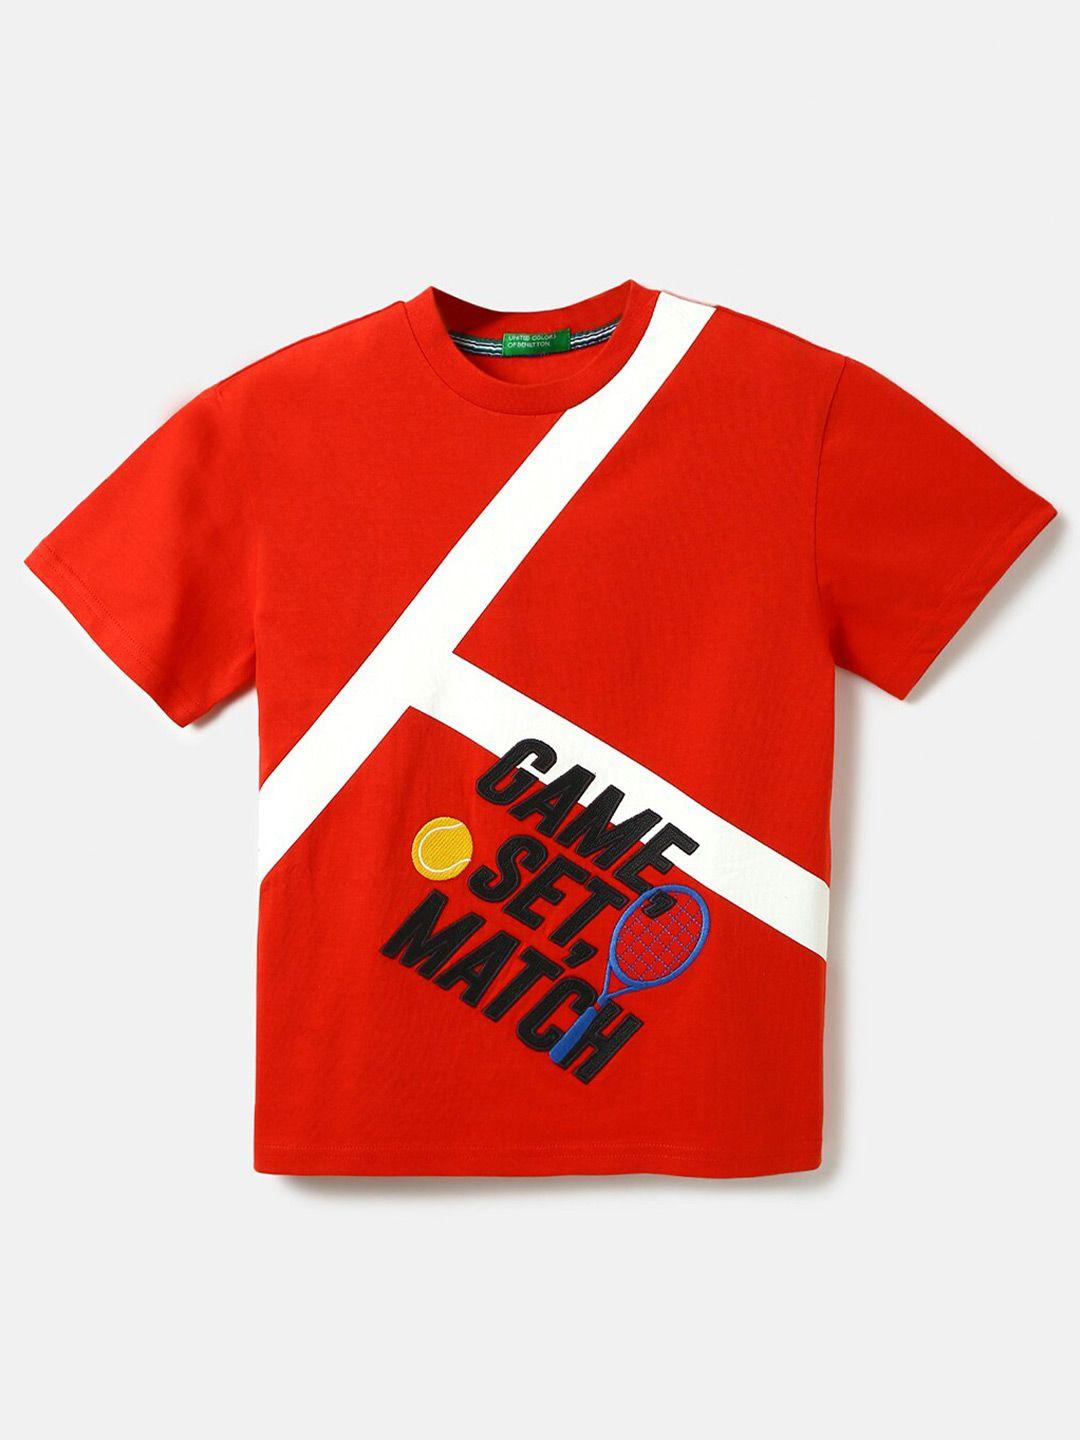 united-colors-of-benetton-boys-cotton-typography-printed-t-shirt